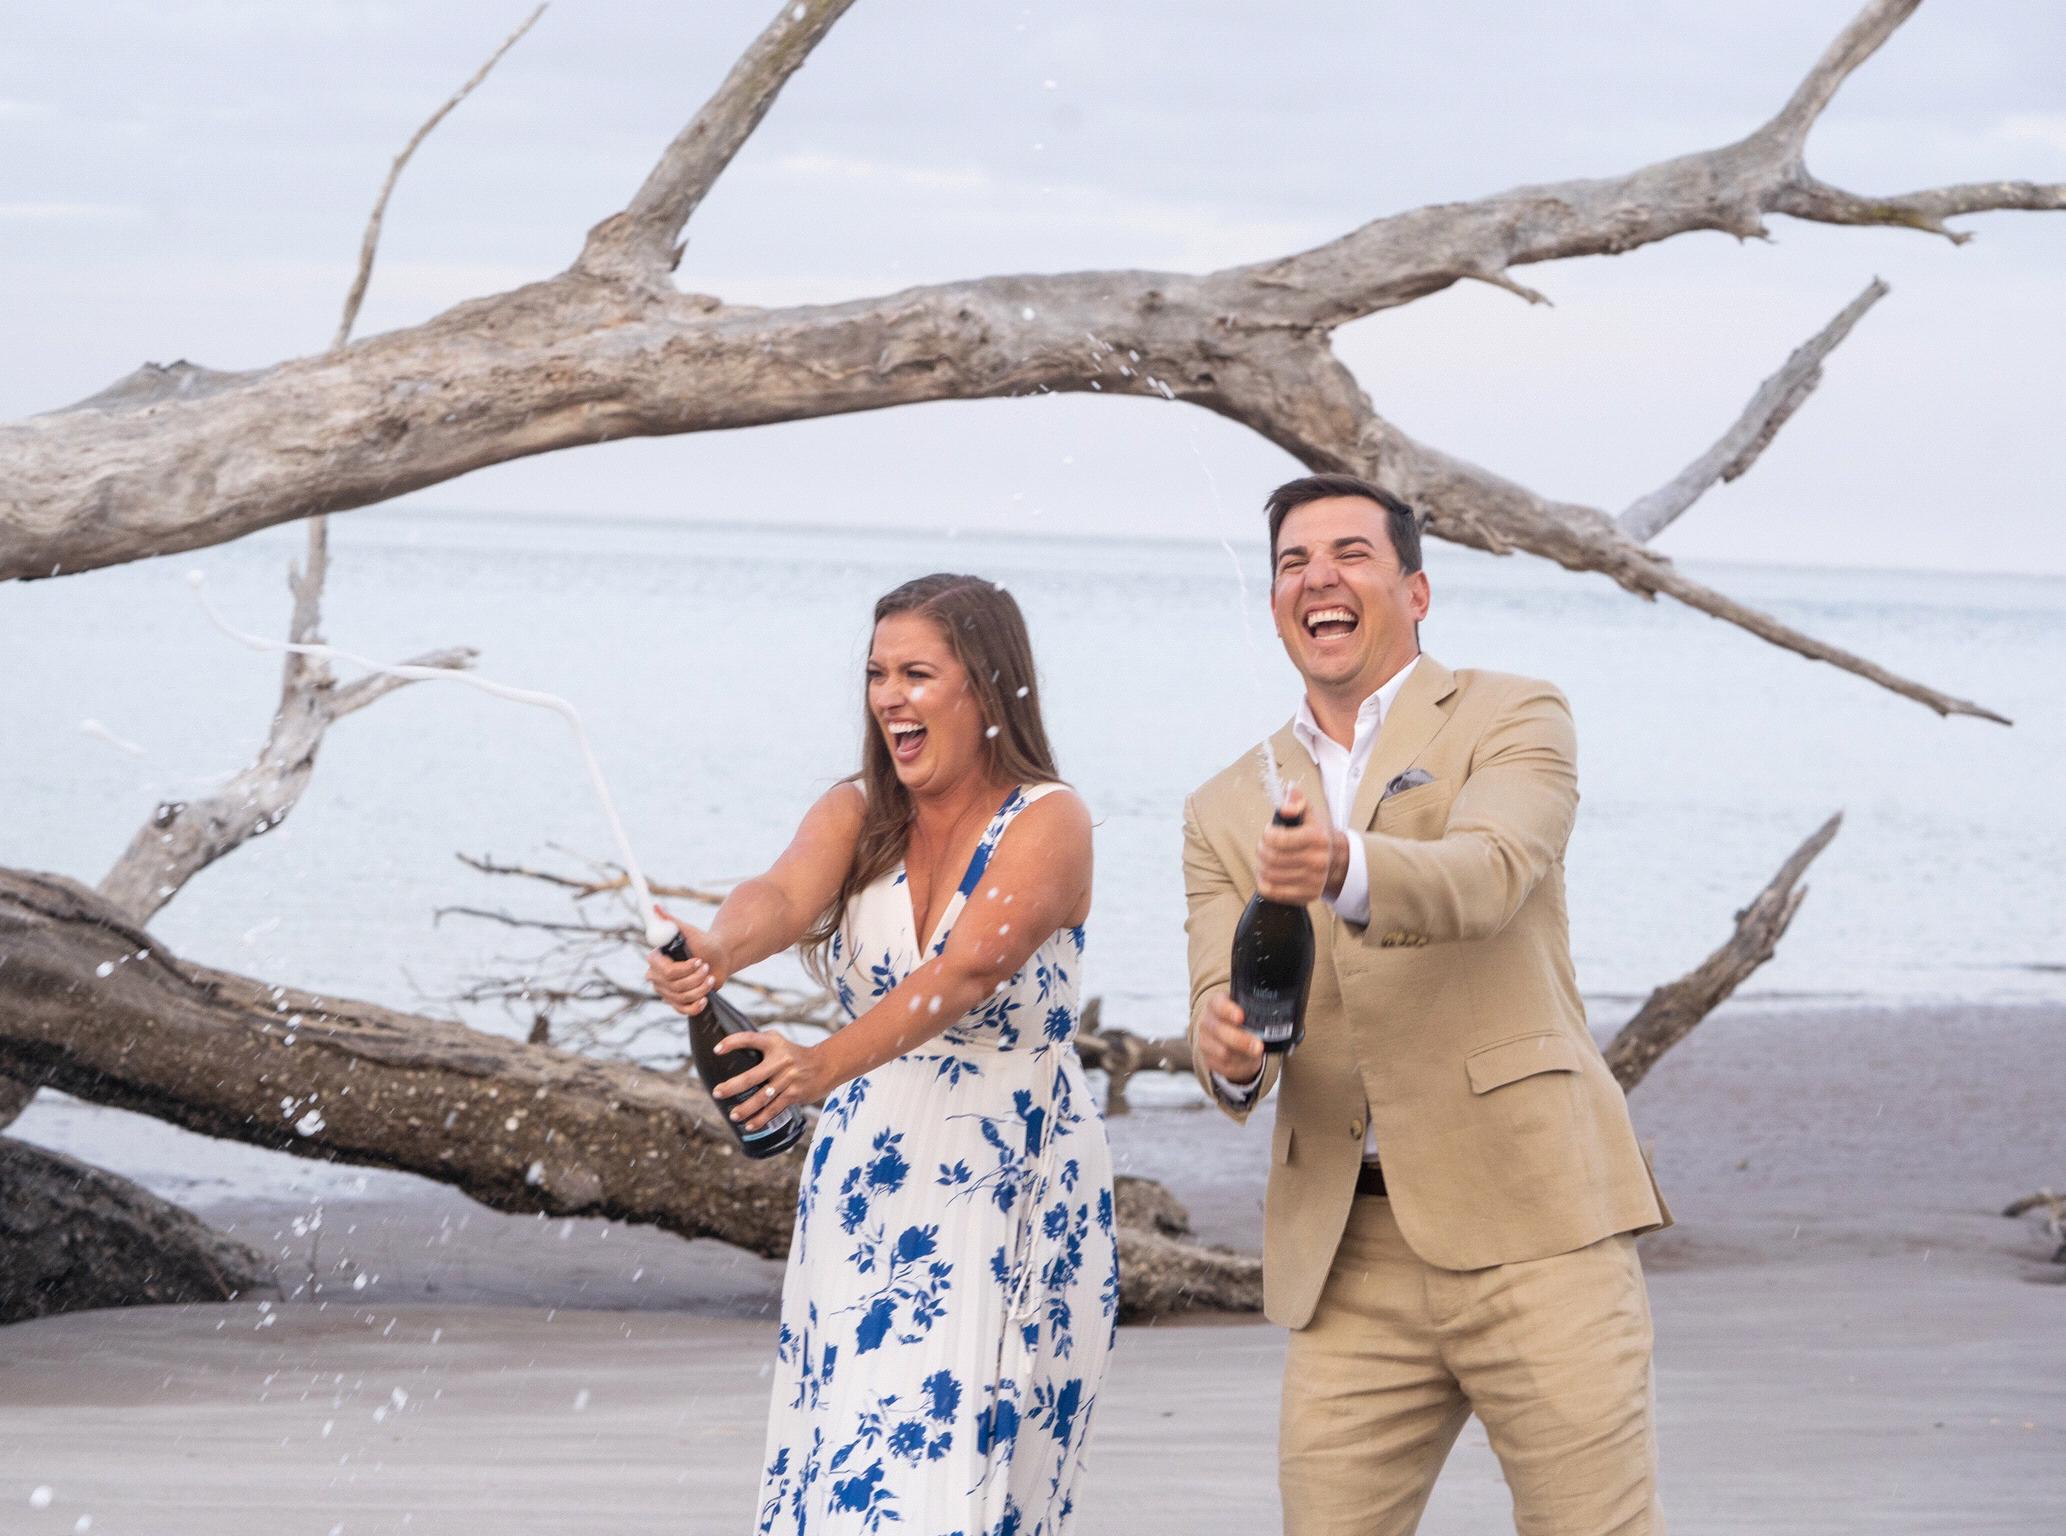 The Wedding Website of Hailey Bush and Stephen Scullian